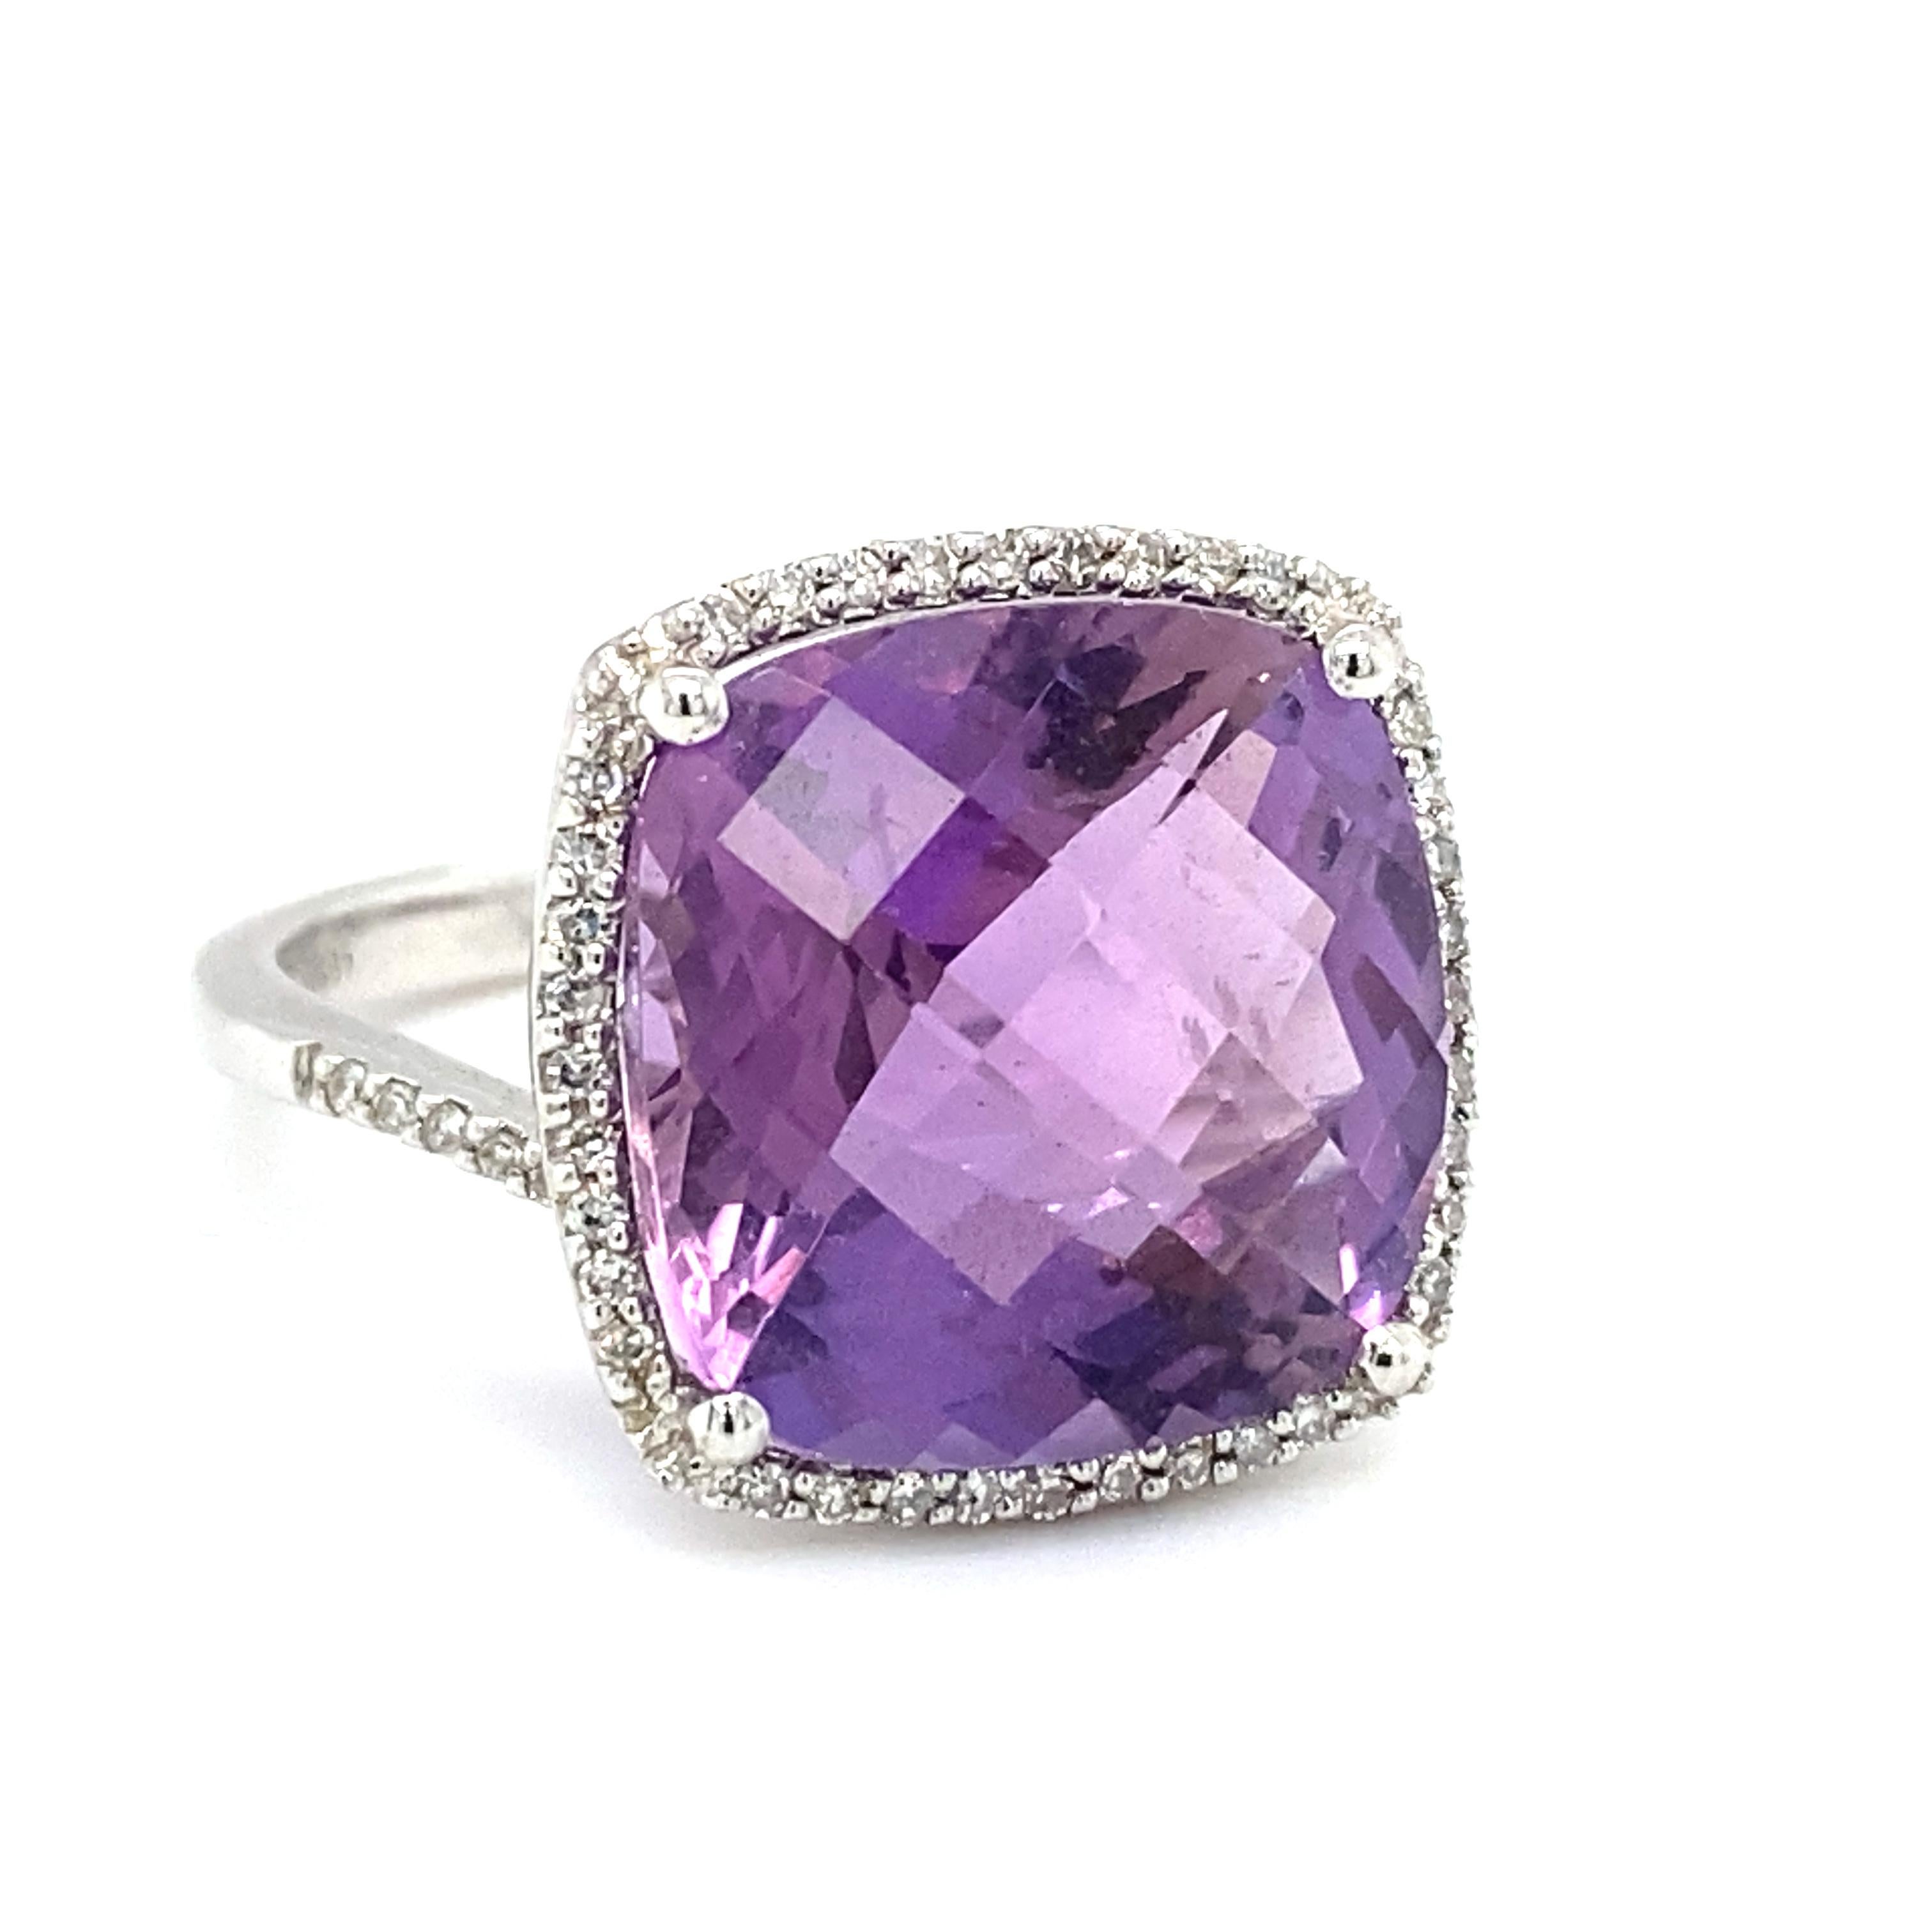 Item Details: This ring with an approximately 8.0 Carat checkerboard cut square amethyst has a halo of diamonds and is set in 14k white gold. It features a unique crisscross design on the shank, which adds to the elegance of the ring. when worn.